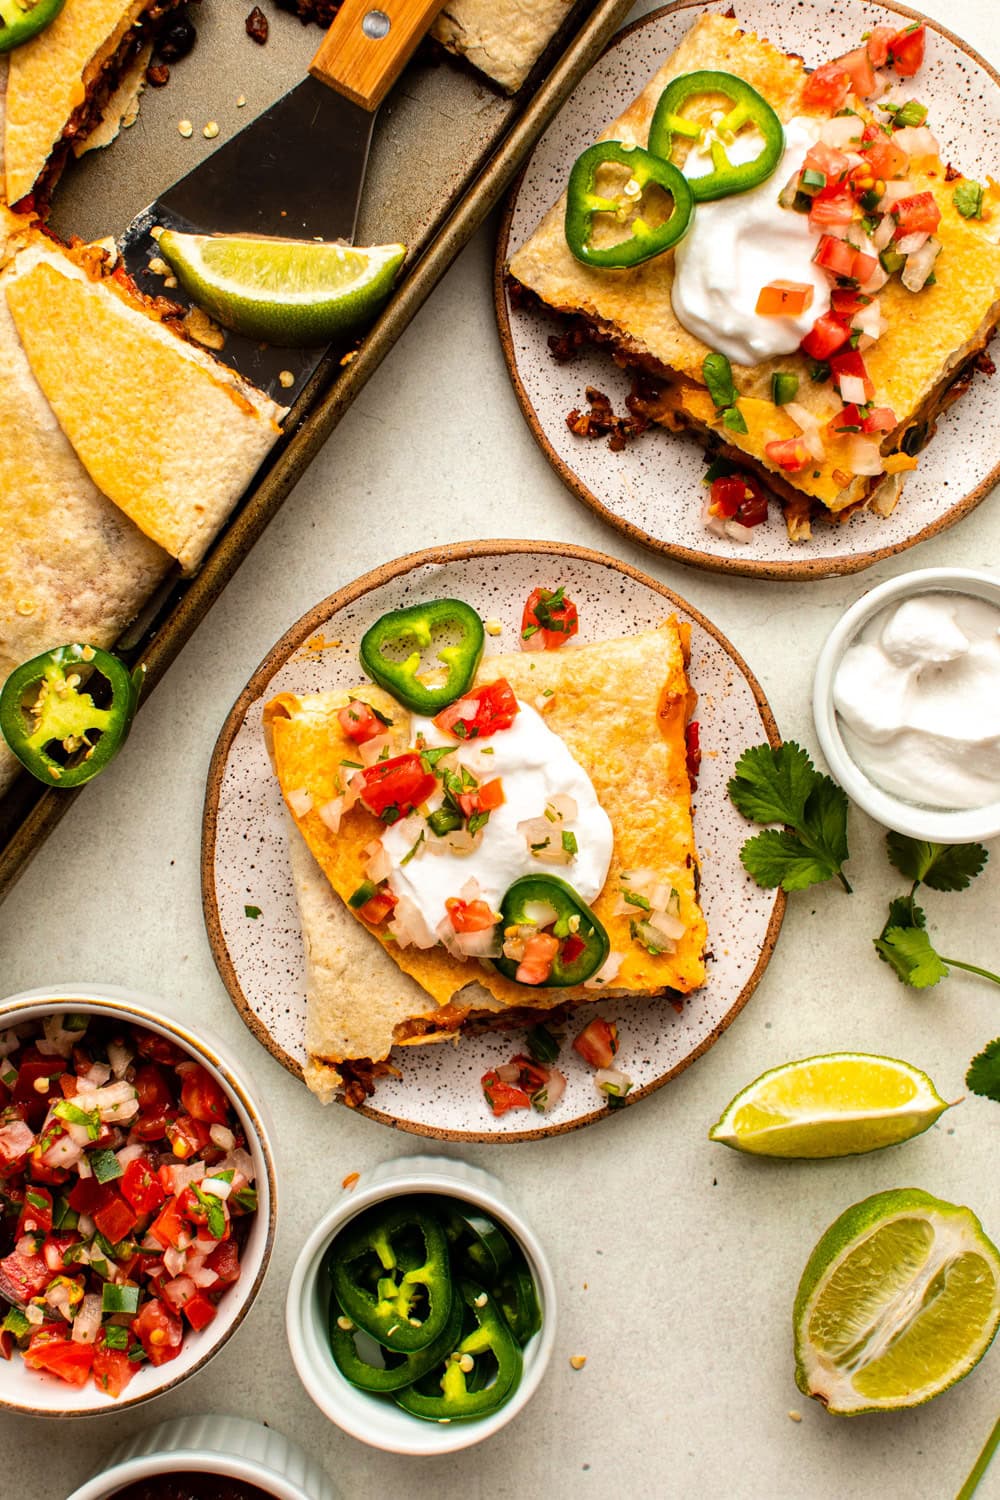 a slice of sheet pan quesadillas served on a plate topped with salsa, sour cream and two slices of jalapeno, placed on a marble kitchen countertop surrounded by the tray of quesadillas and several bowls served with salsa, sliced jalapenos, sour cream and slices of lime